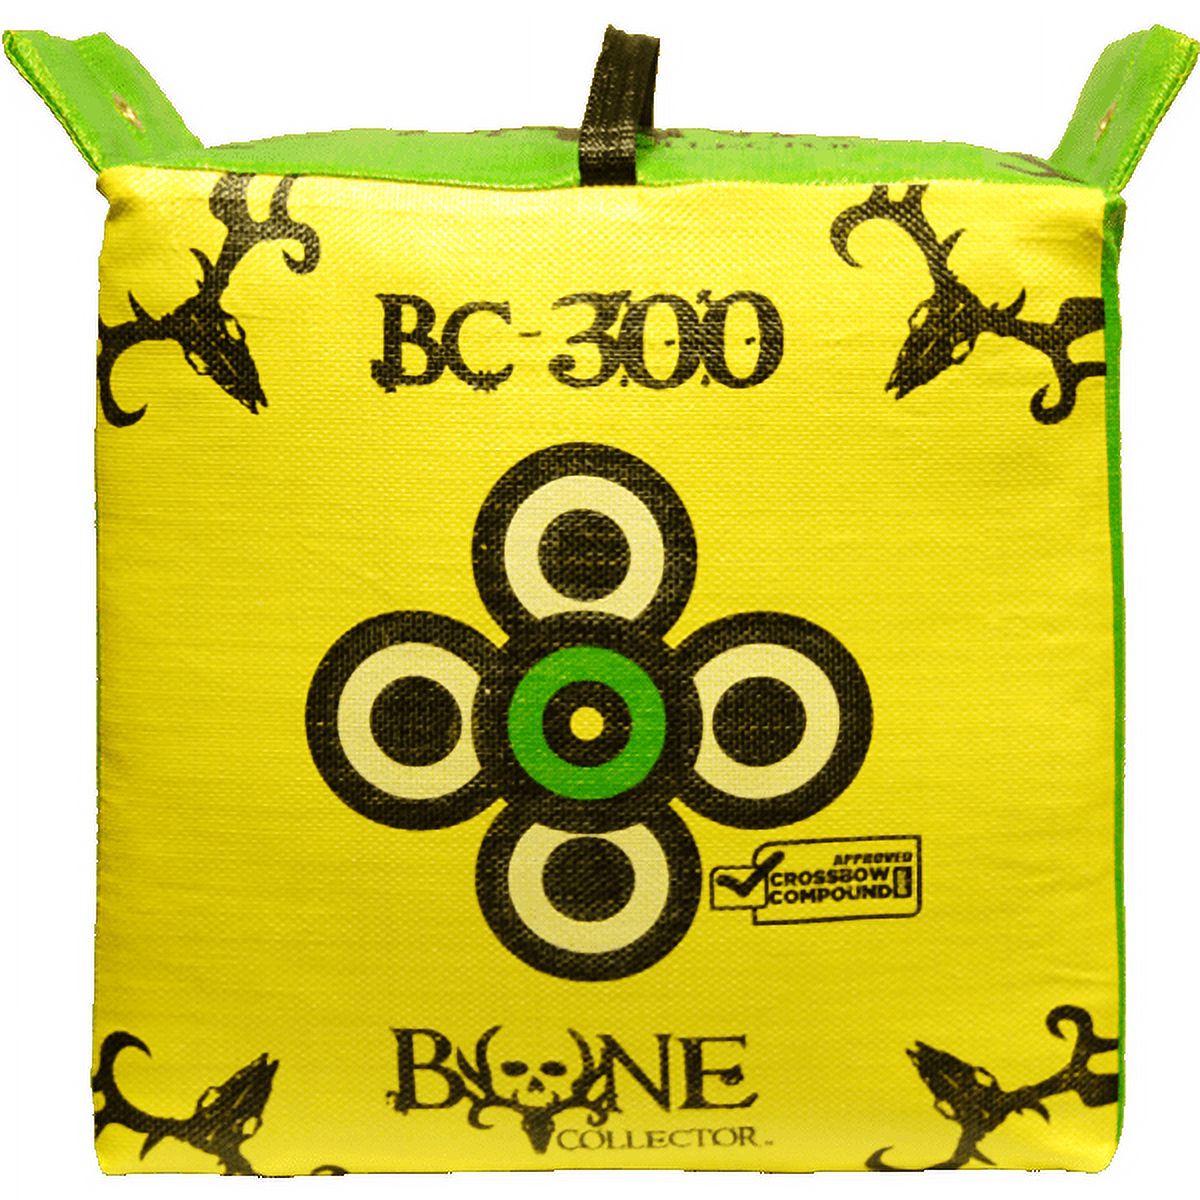 Bone Collector BC-300 Bag Field Point Archery Target - image 2 of 7